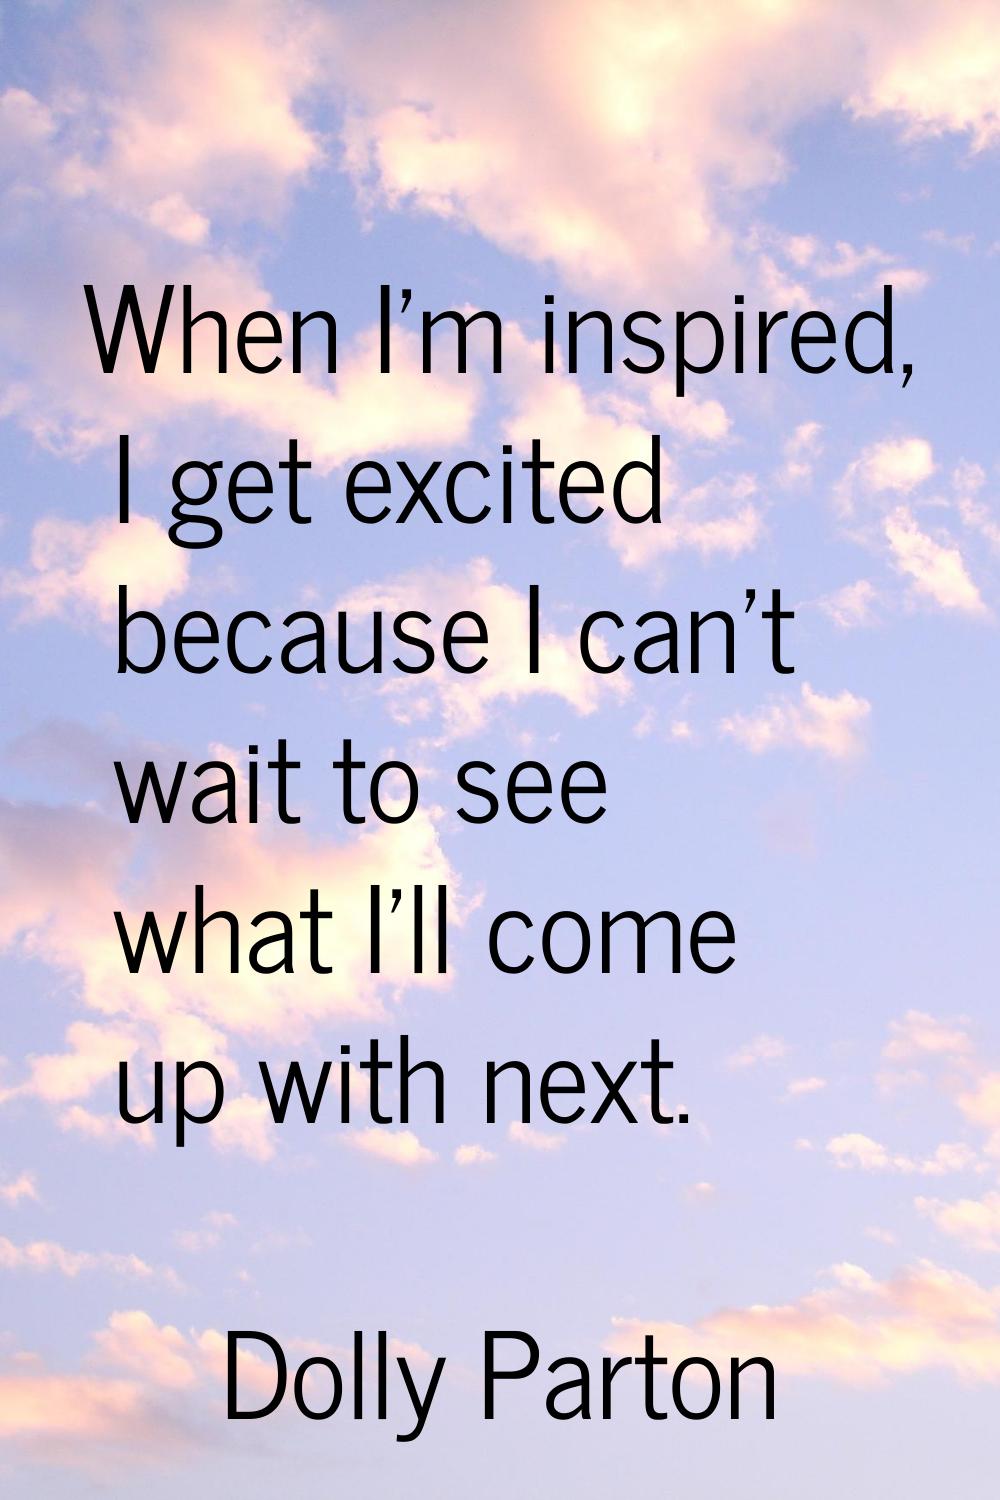 When I'm inspired, I get excited because I can't wait to see what I'll come up with next.